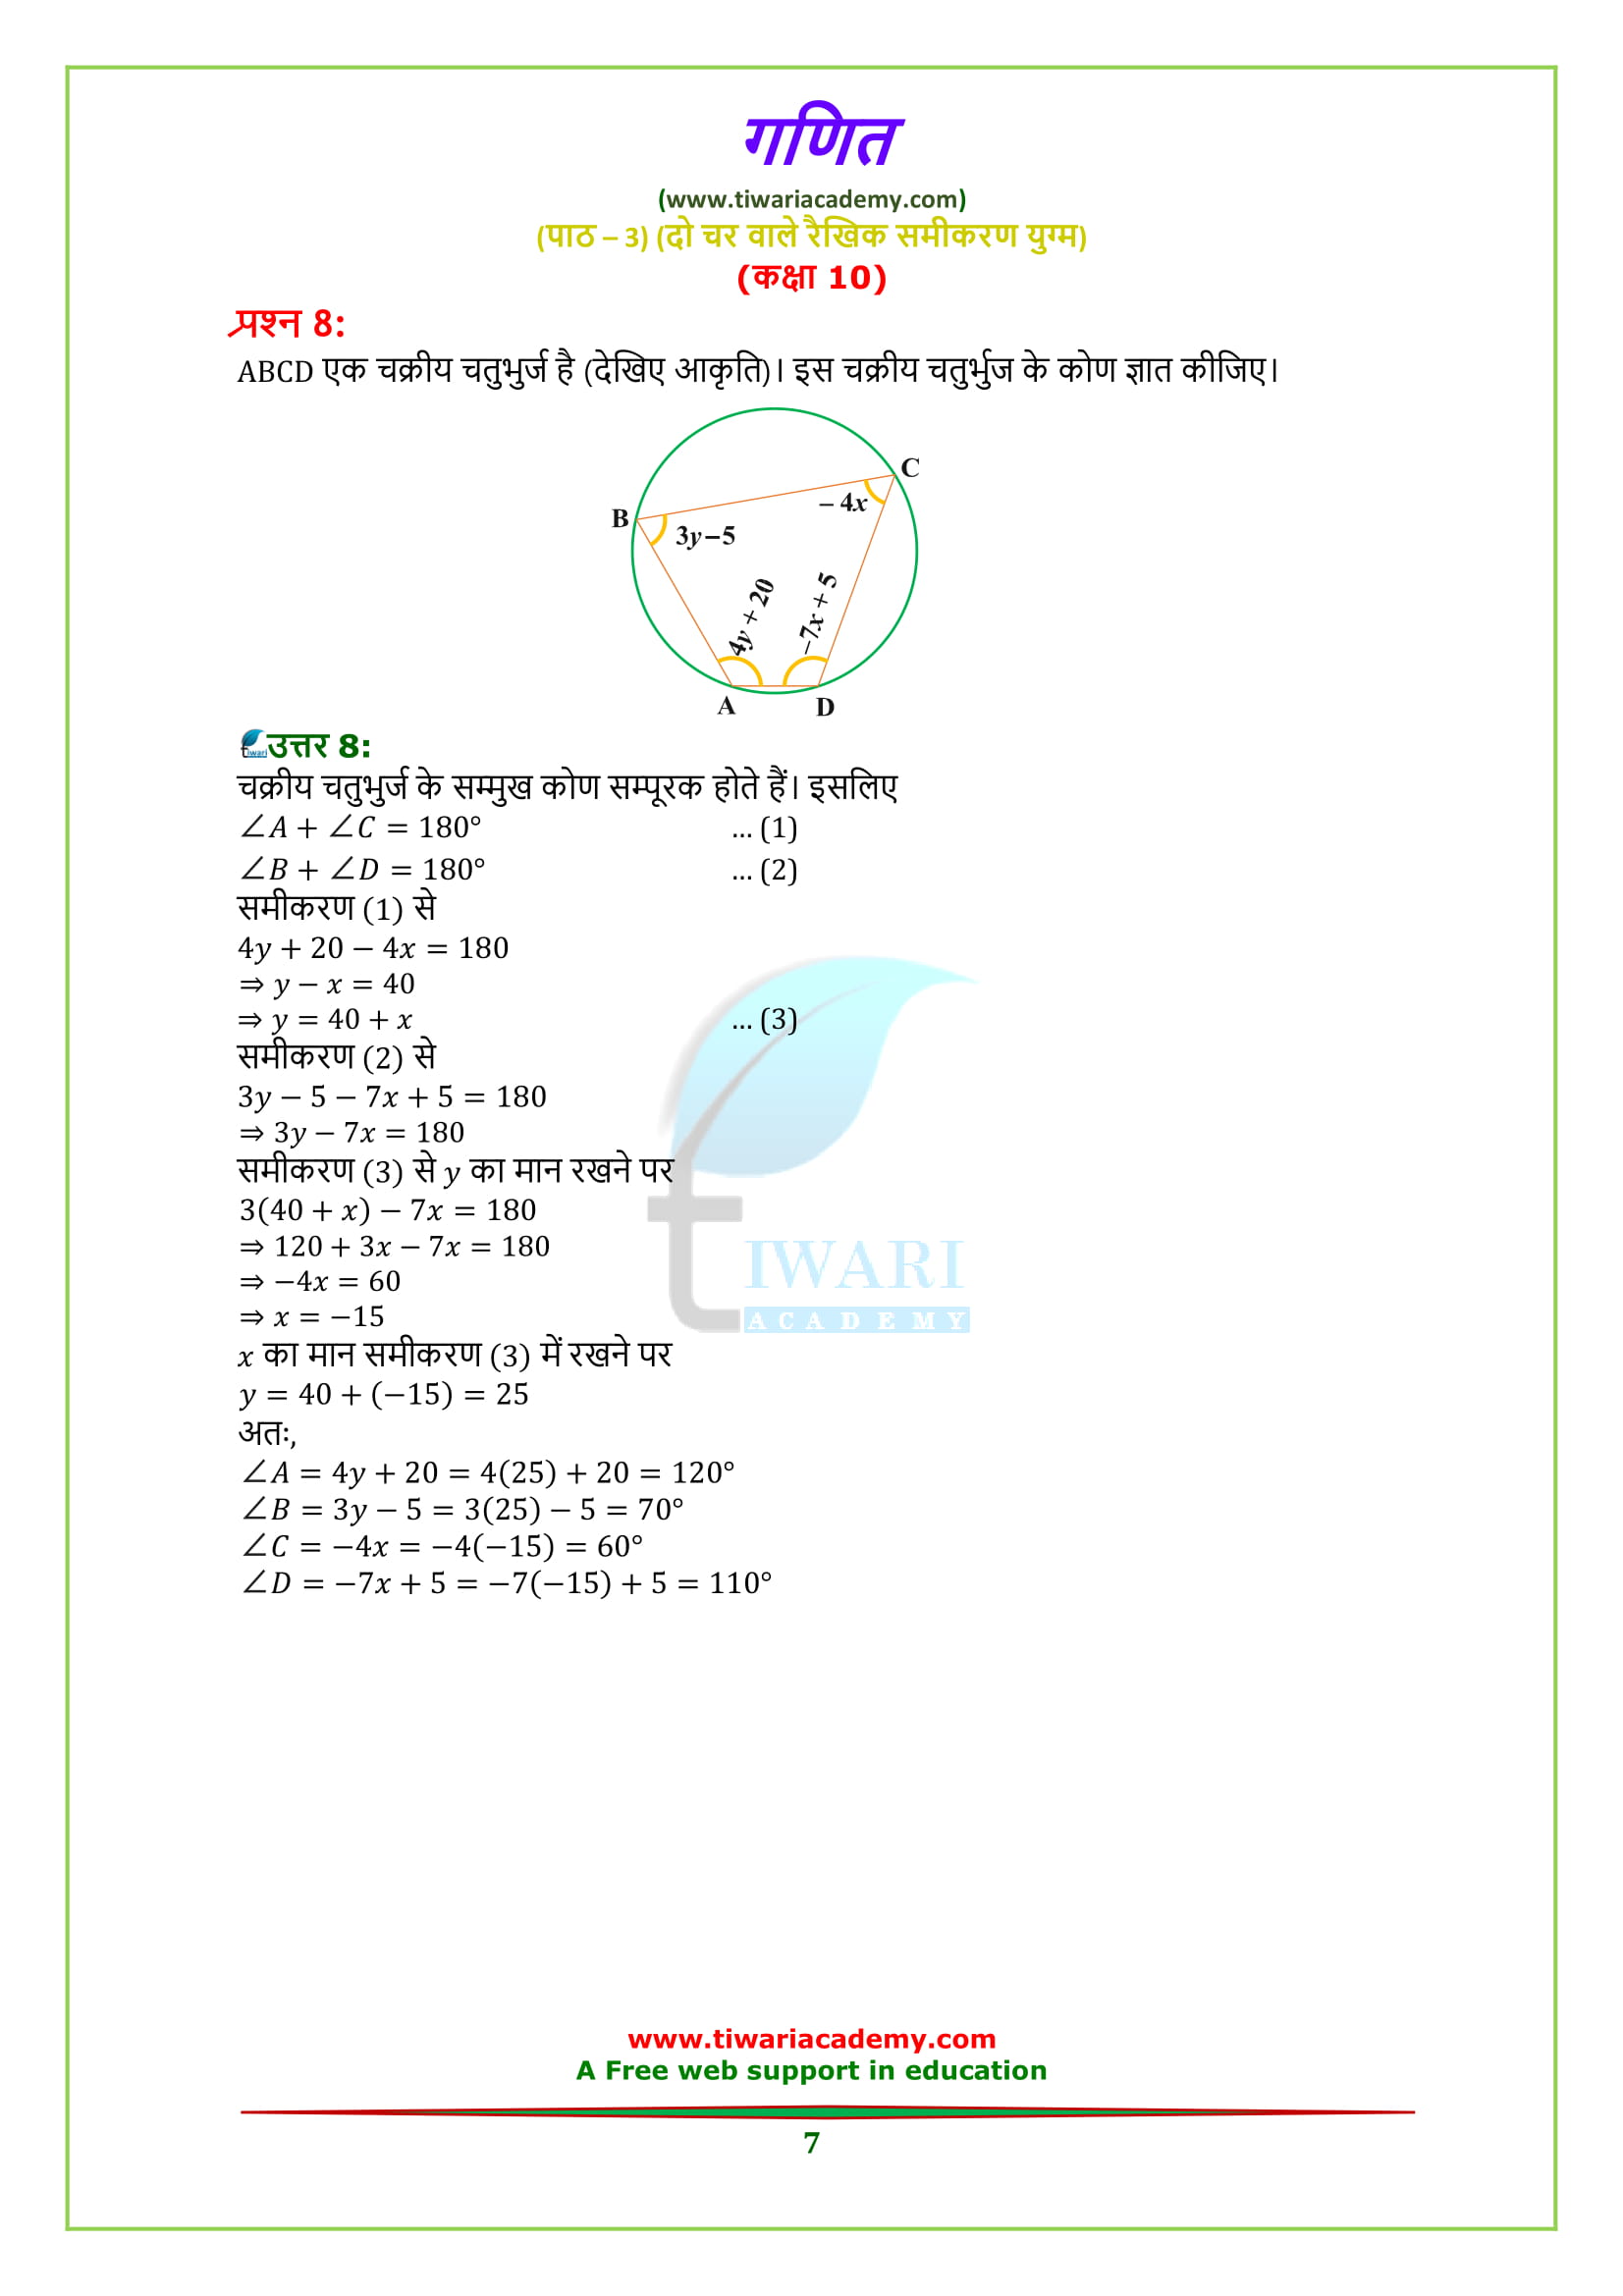 Class 10 maths chapter 3 optional exercise 3.7 solutions all question answers